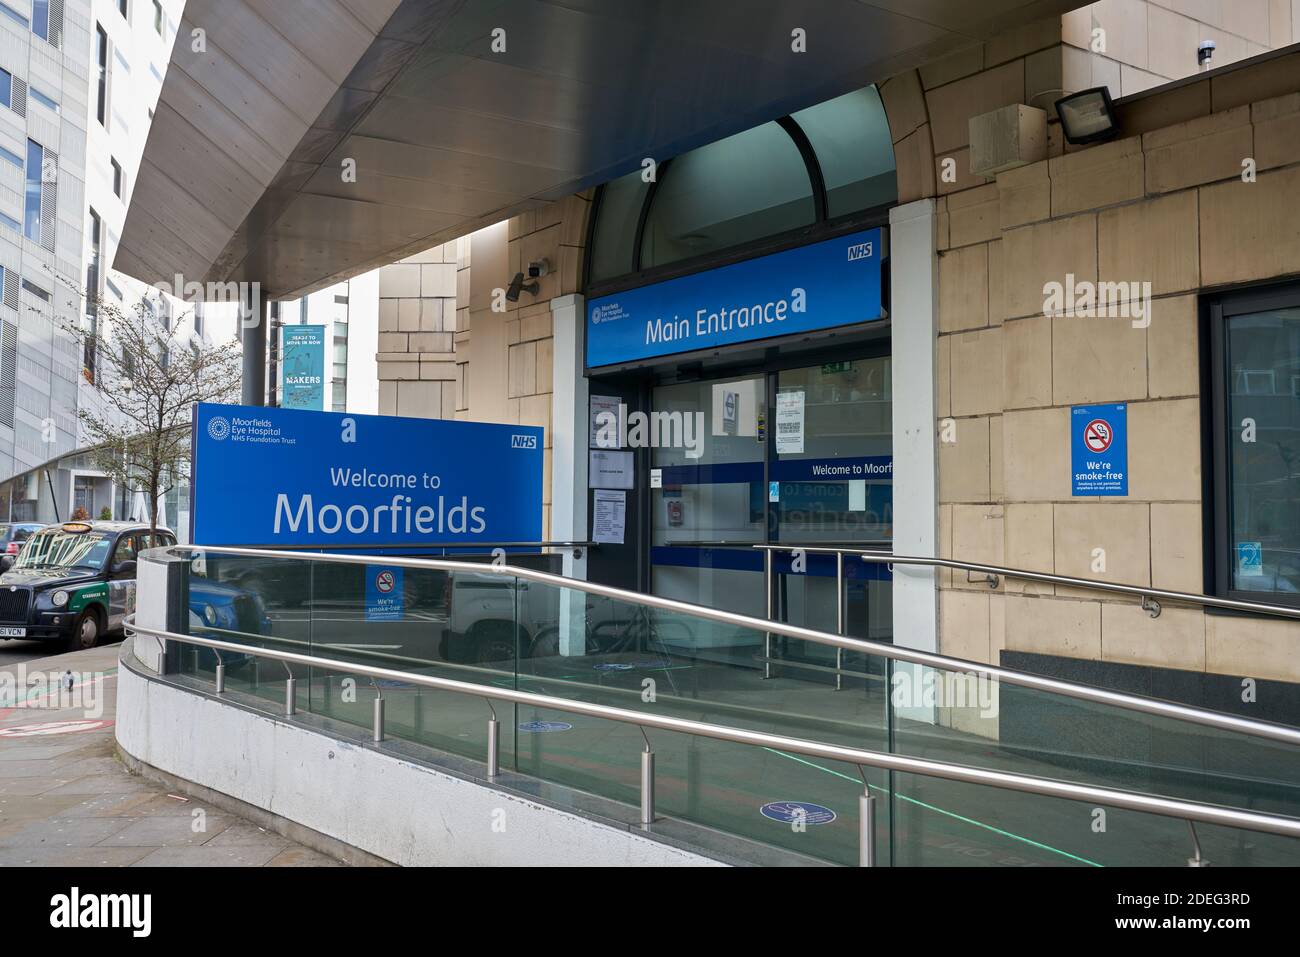 moorfields eye hospital londres Banque D'Images